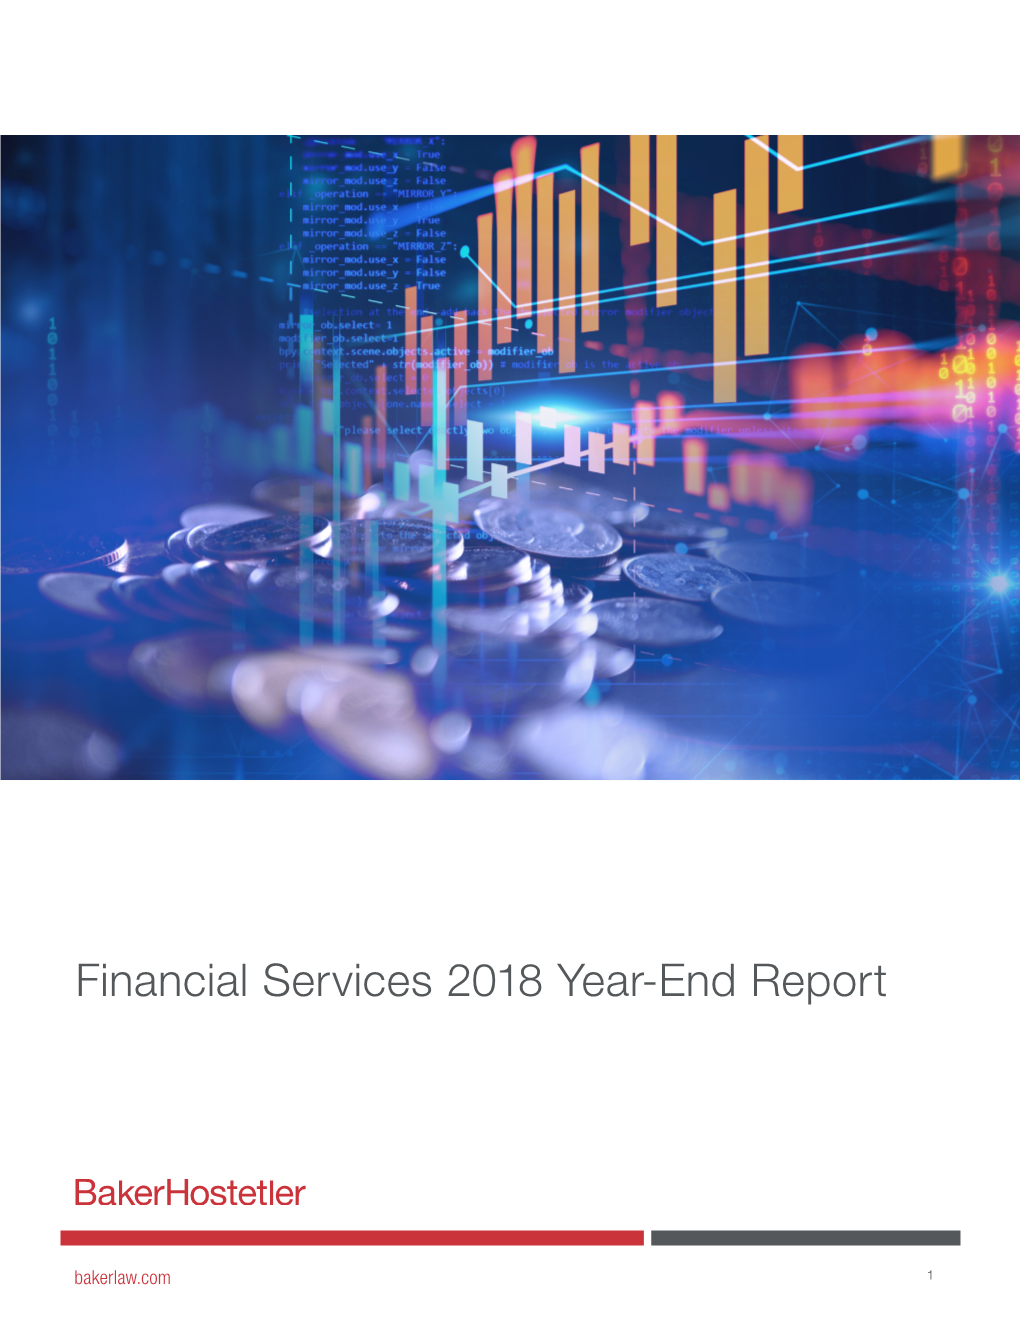 Financial Services 2018 Year-End Report